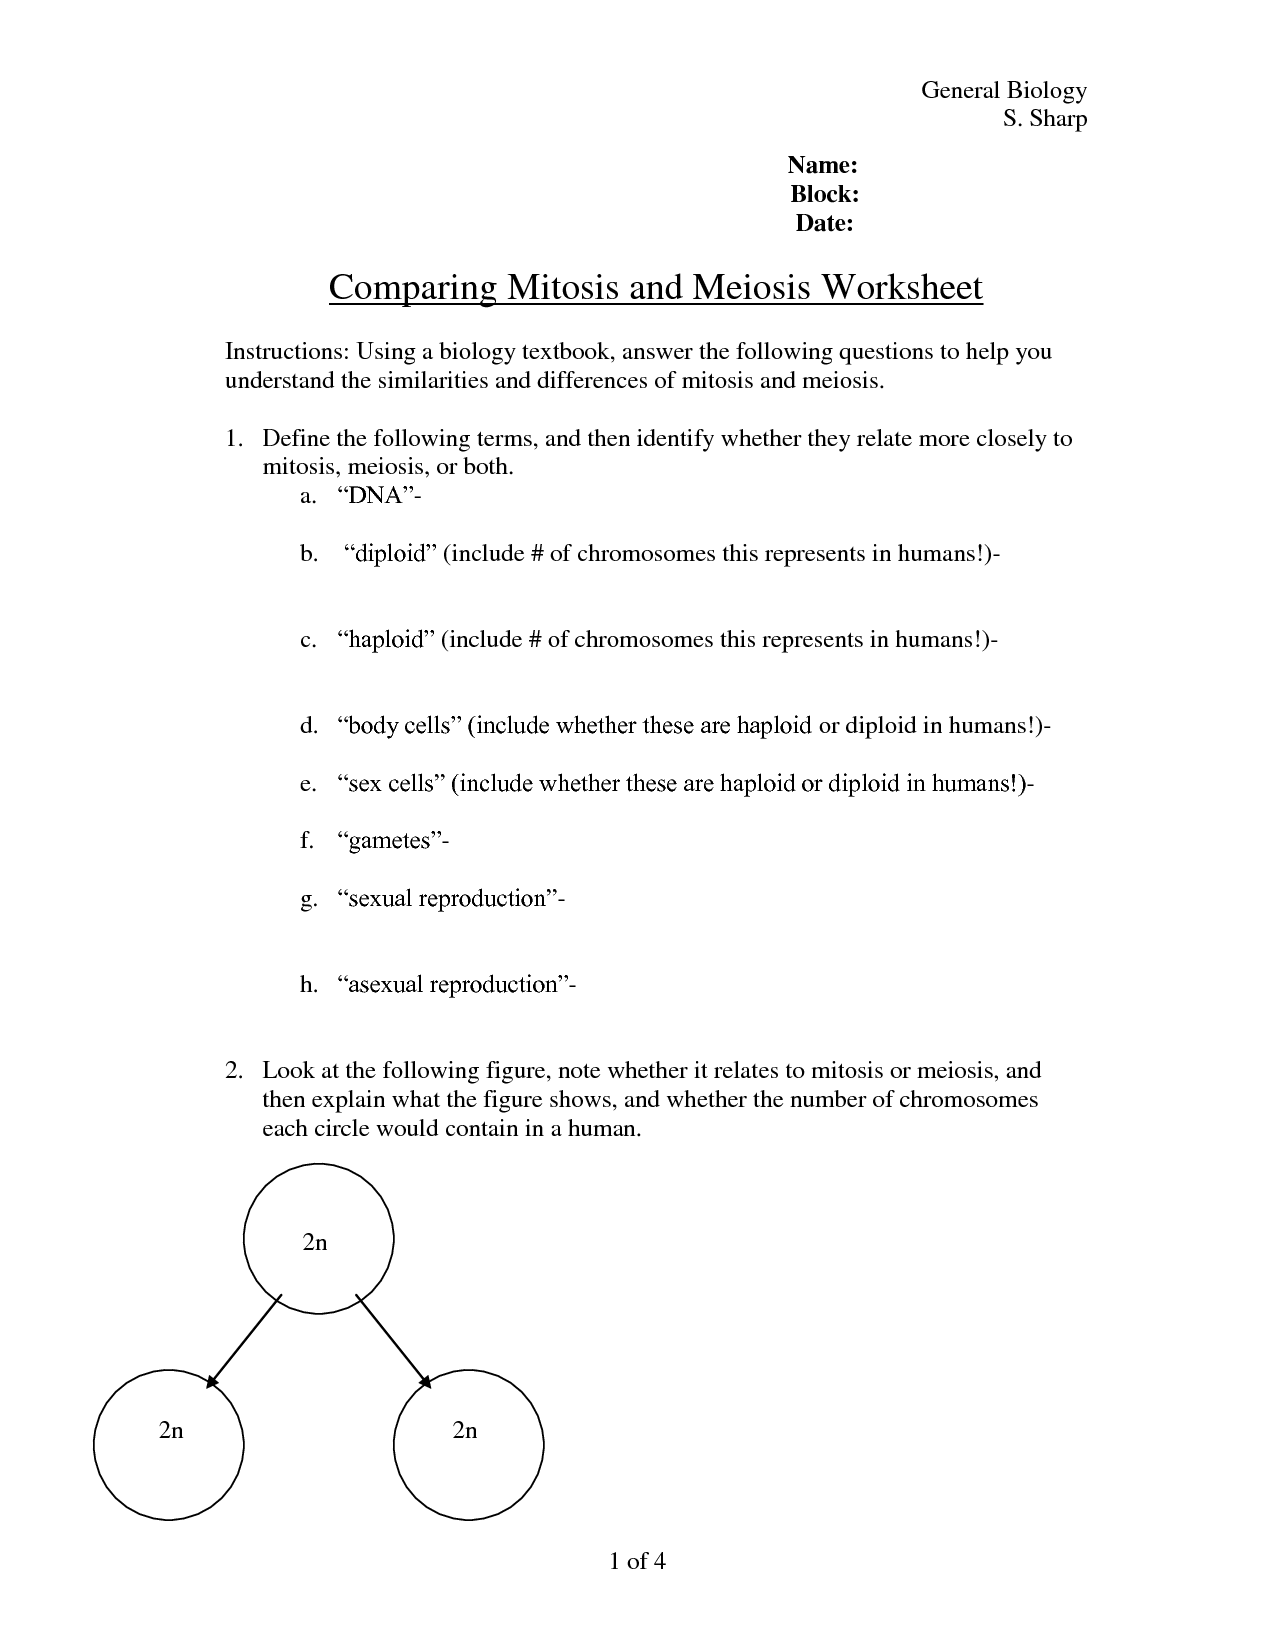 13 Best Images of Comparing Mitosis And Meiosis Worksheet 